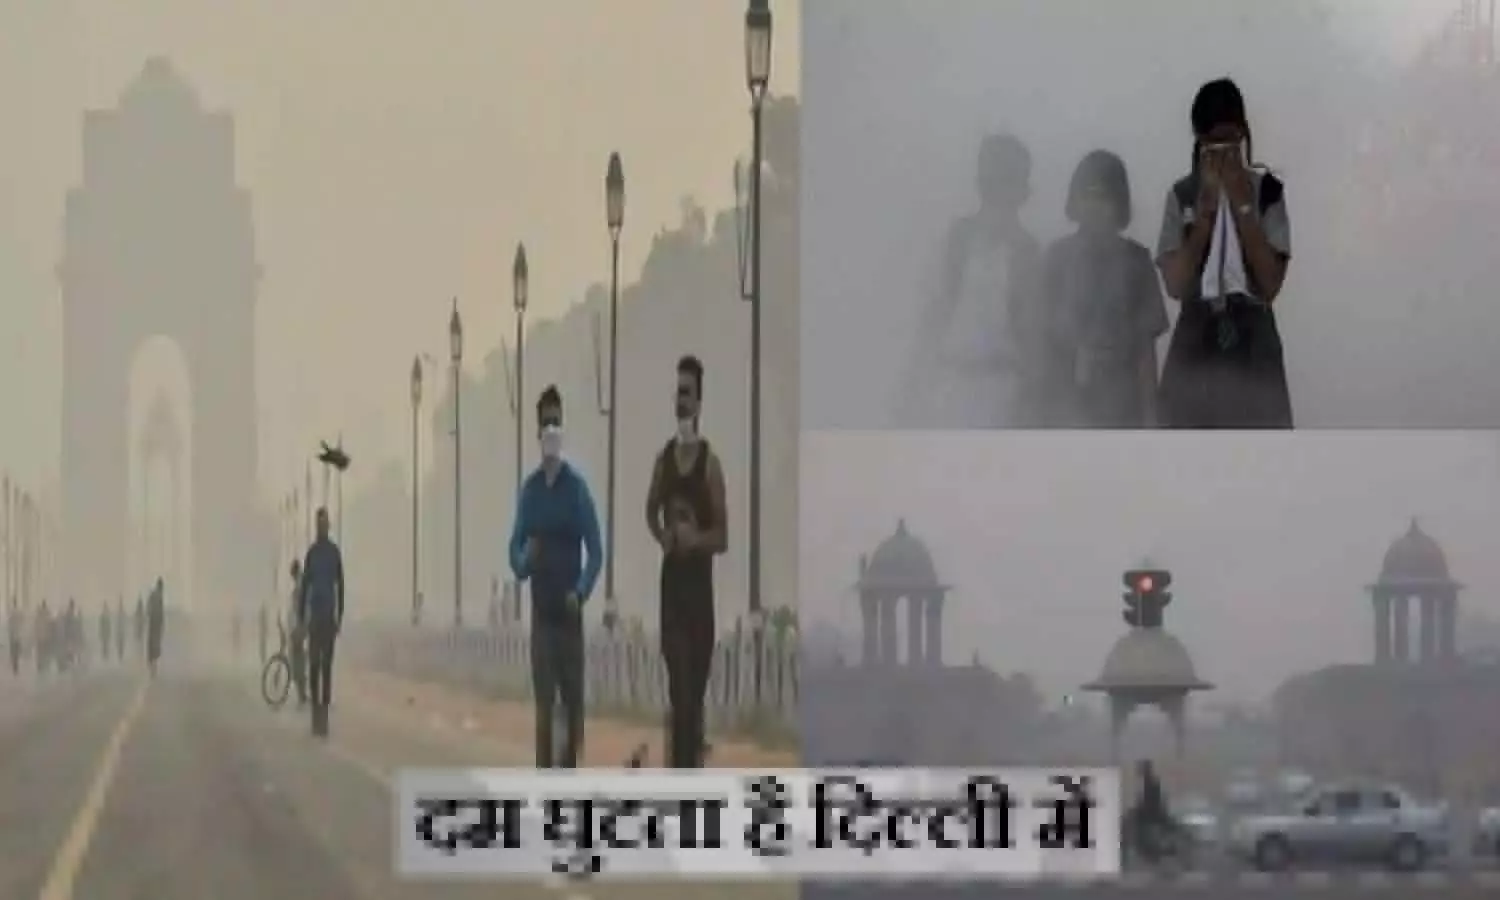 Delhi-NCRs air quality is very poor, people complain of burning eyes and difficulty in breathing